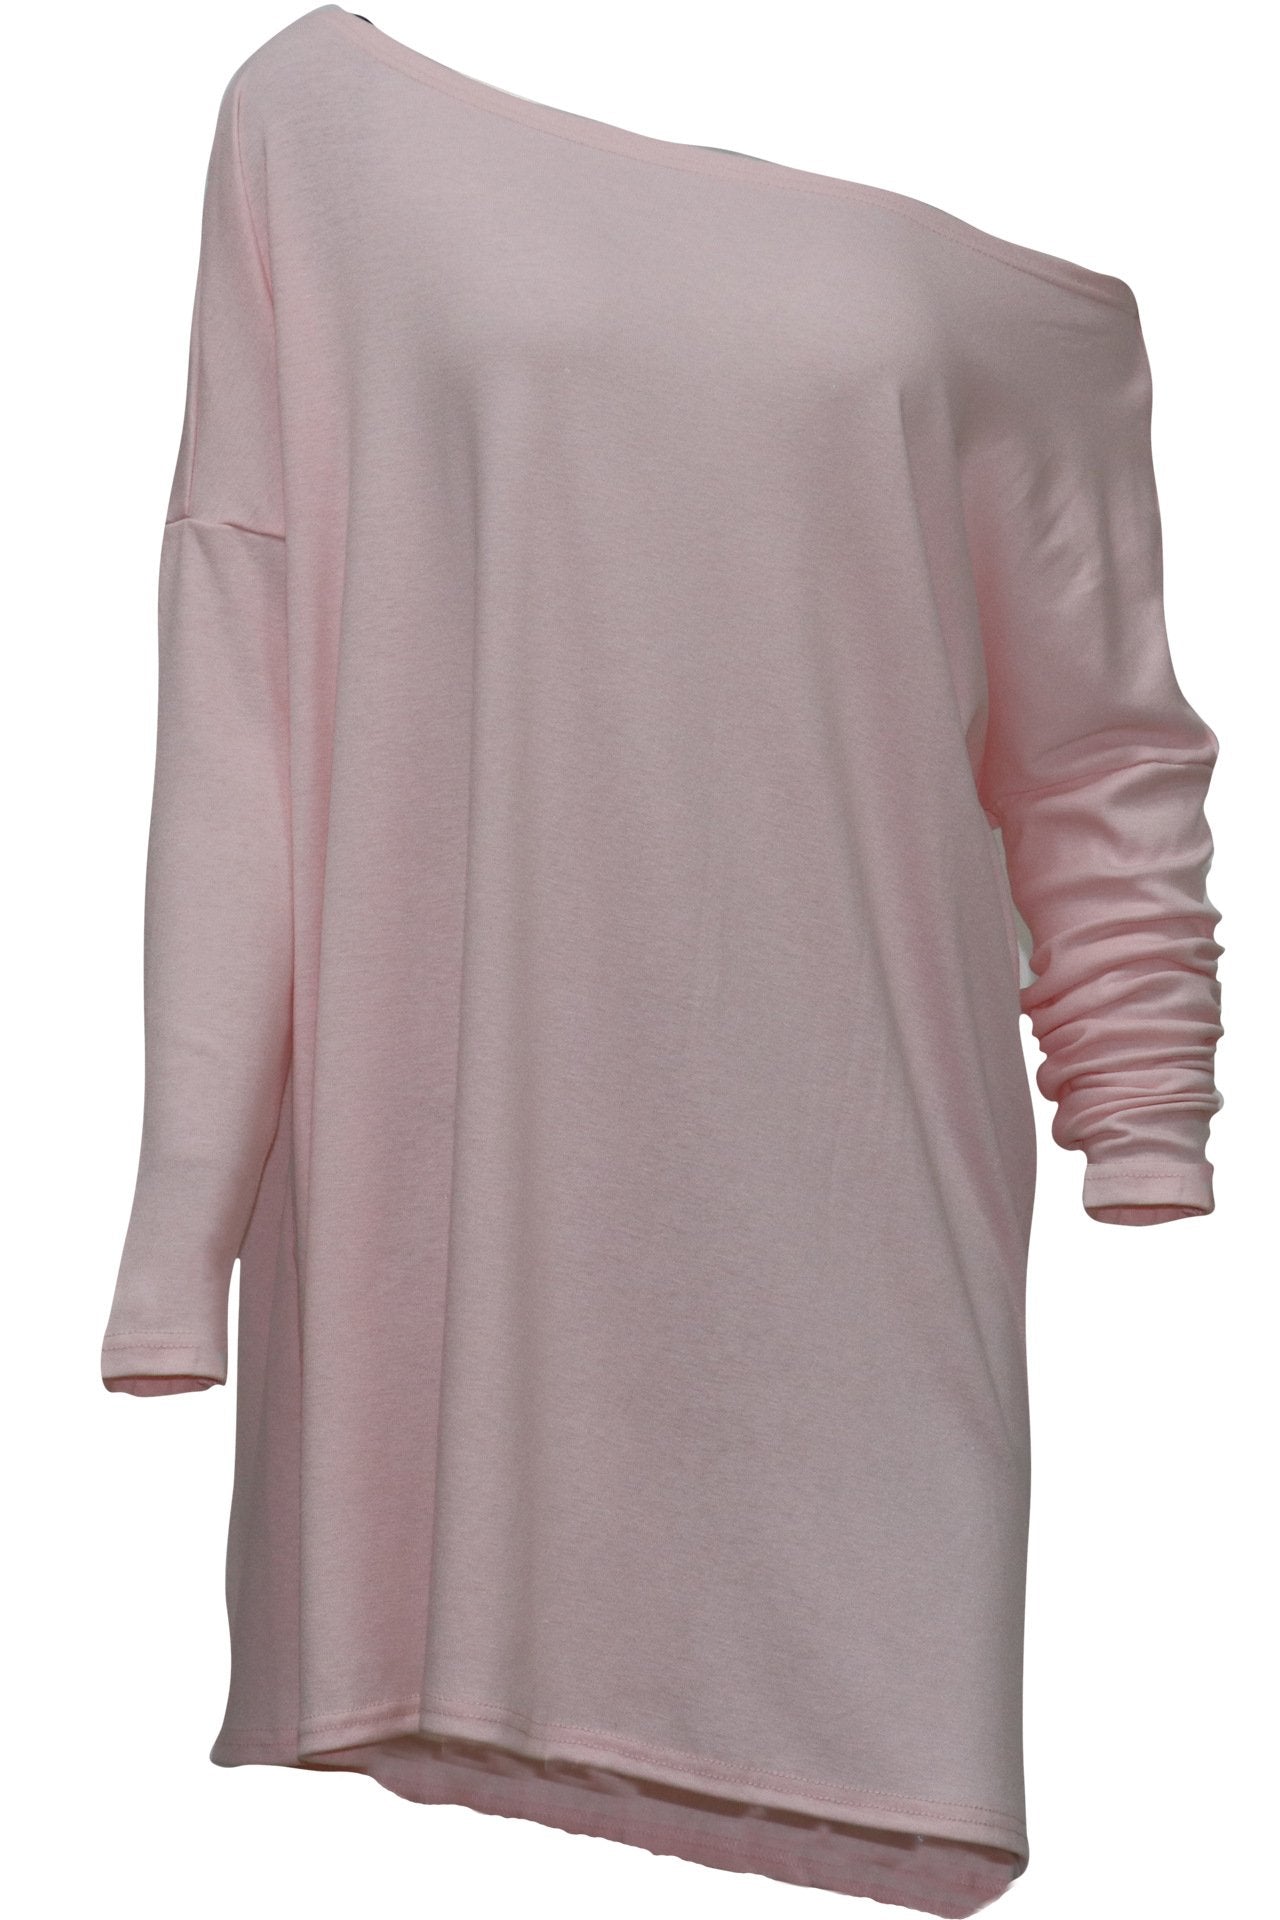 Fashion Off The Shoulder Long Sleeves T Shirts-STYLEGOING